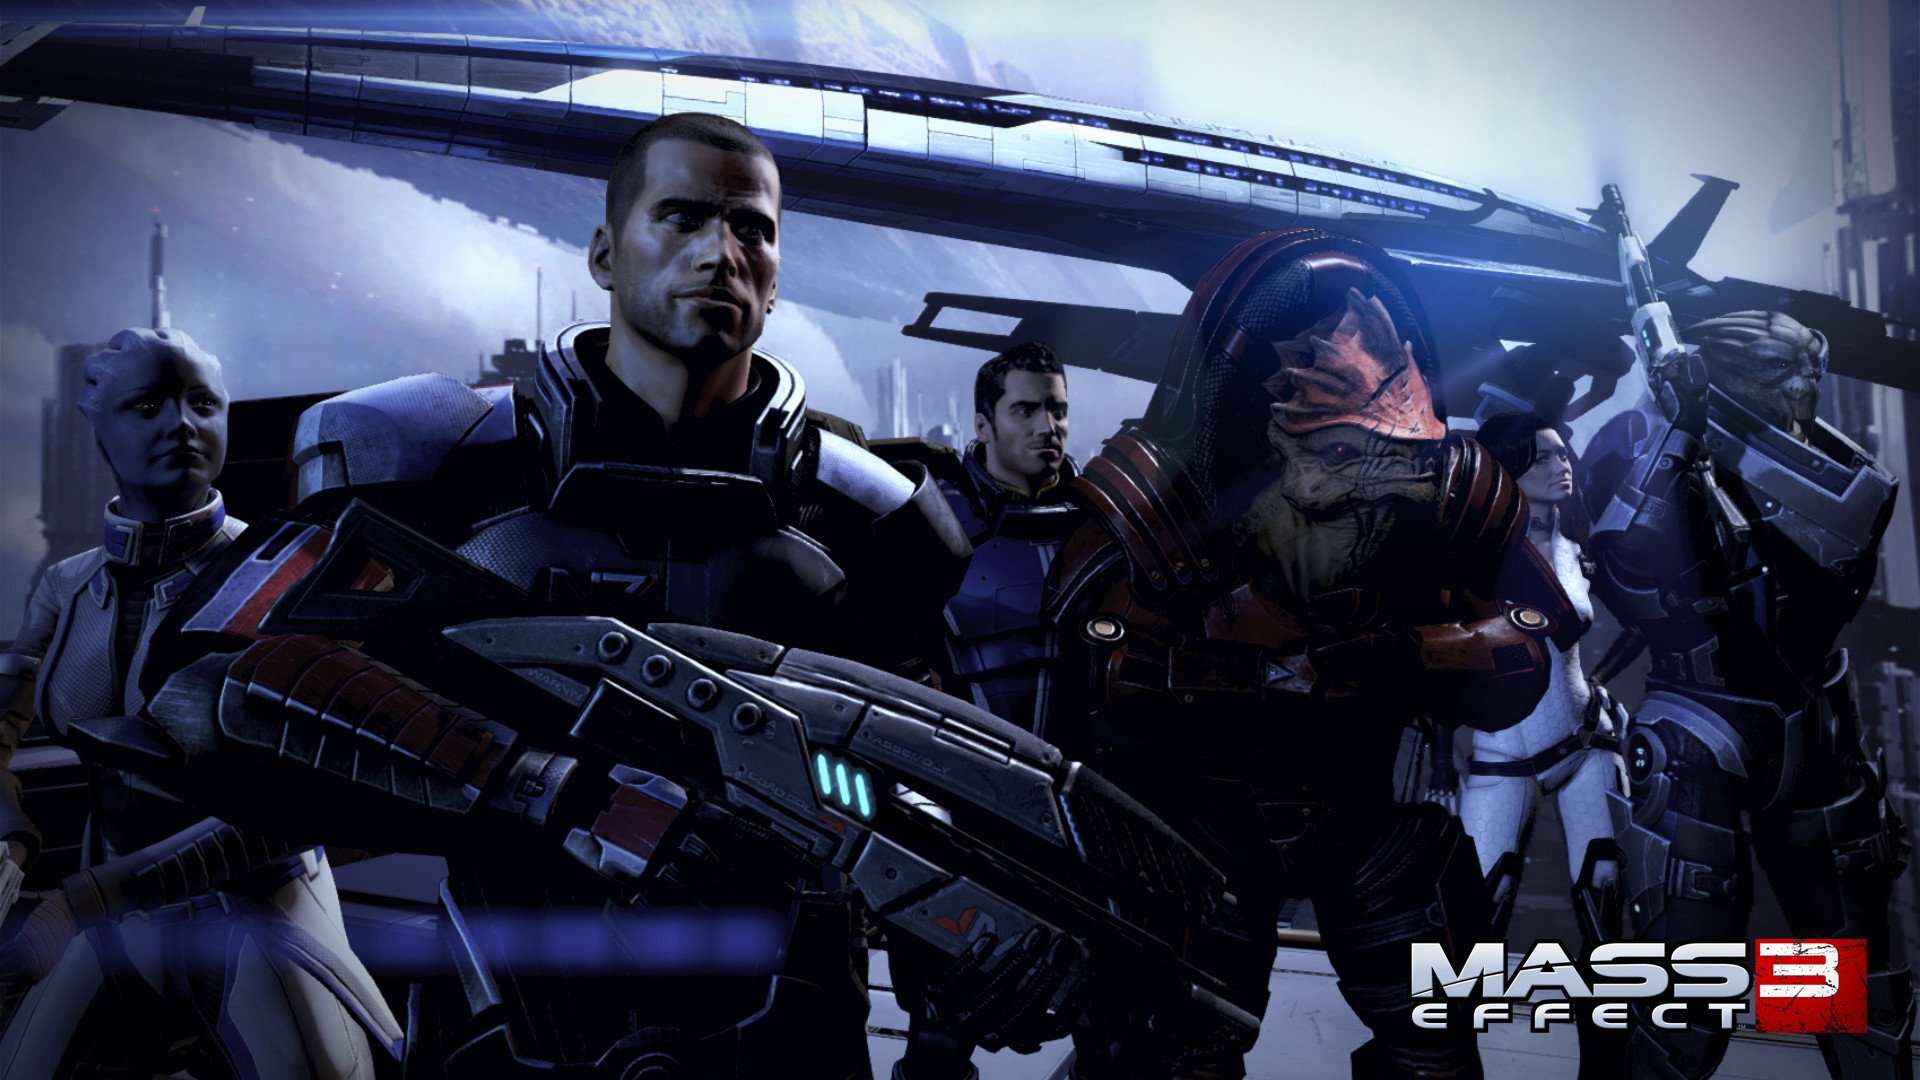 Get free DLC for Mass Effect and Dragon Age games